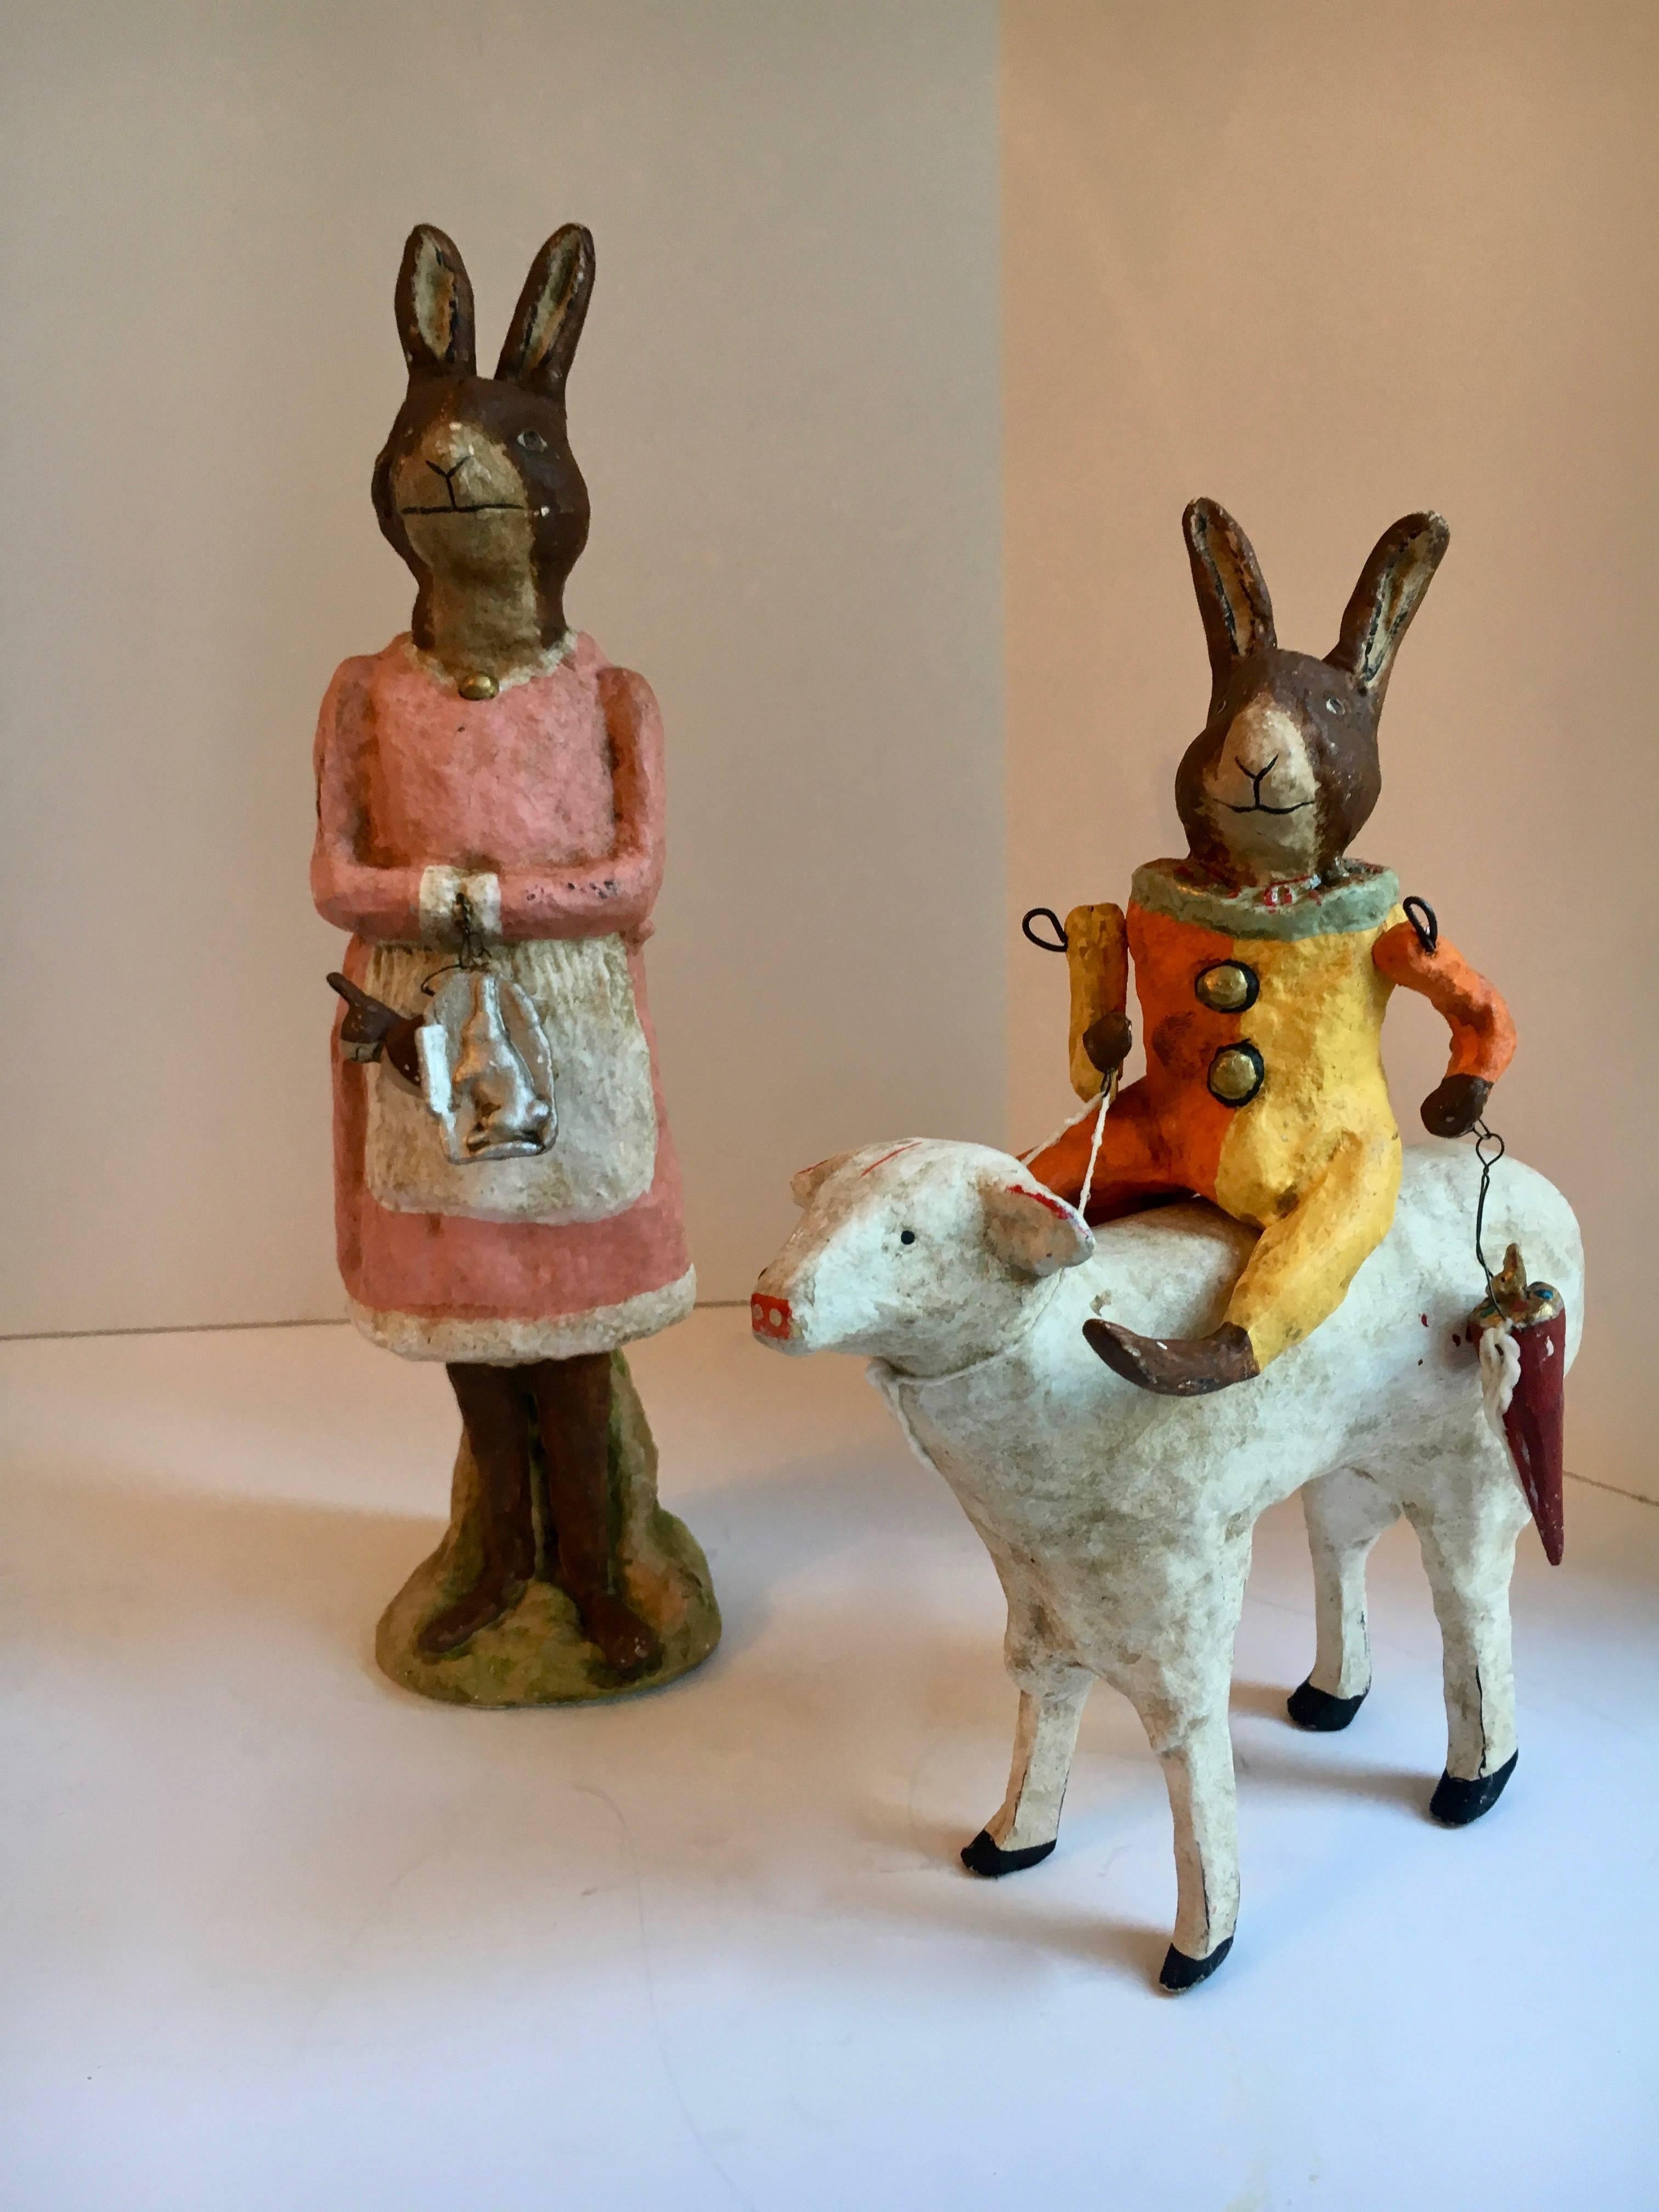 Signed Folk Art papier mâché rabbit figures, signed and numbered by Debbie Thibault, meticulously made and perfect for the collector or holiday, whimsical and colorful.